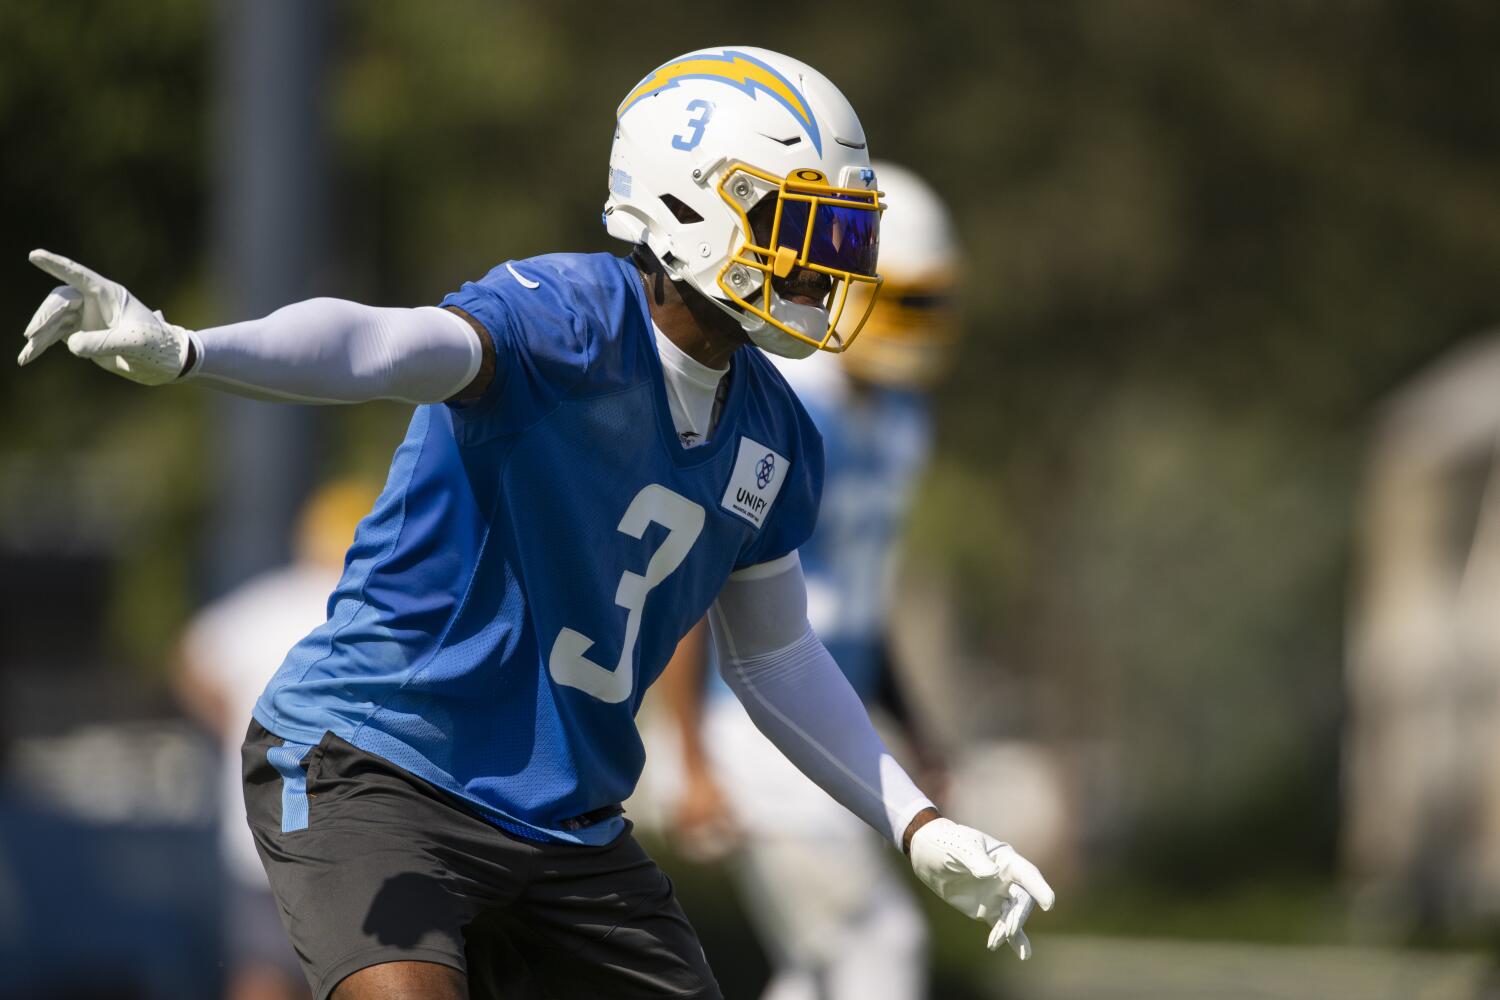 Maturation of Chargers defense in focus as leader Derwin James Jr. says 'We've got the pieces to do it'